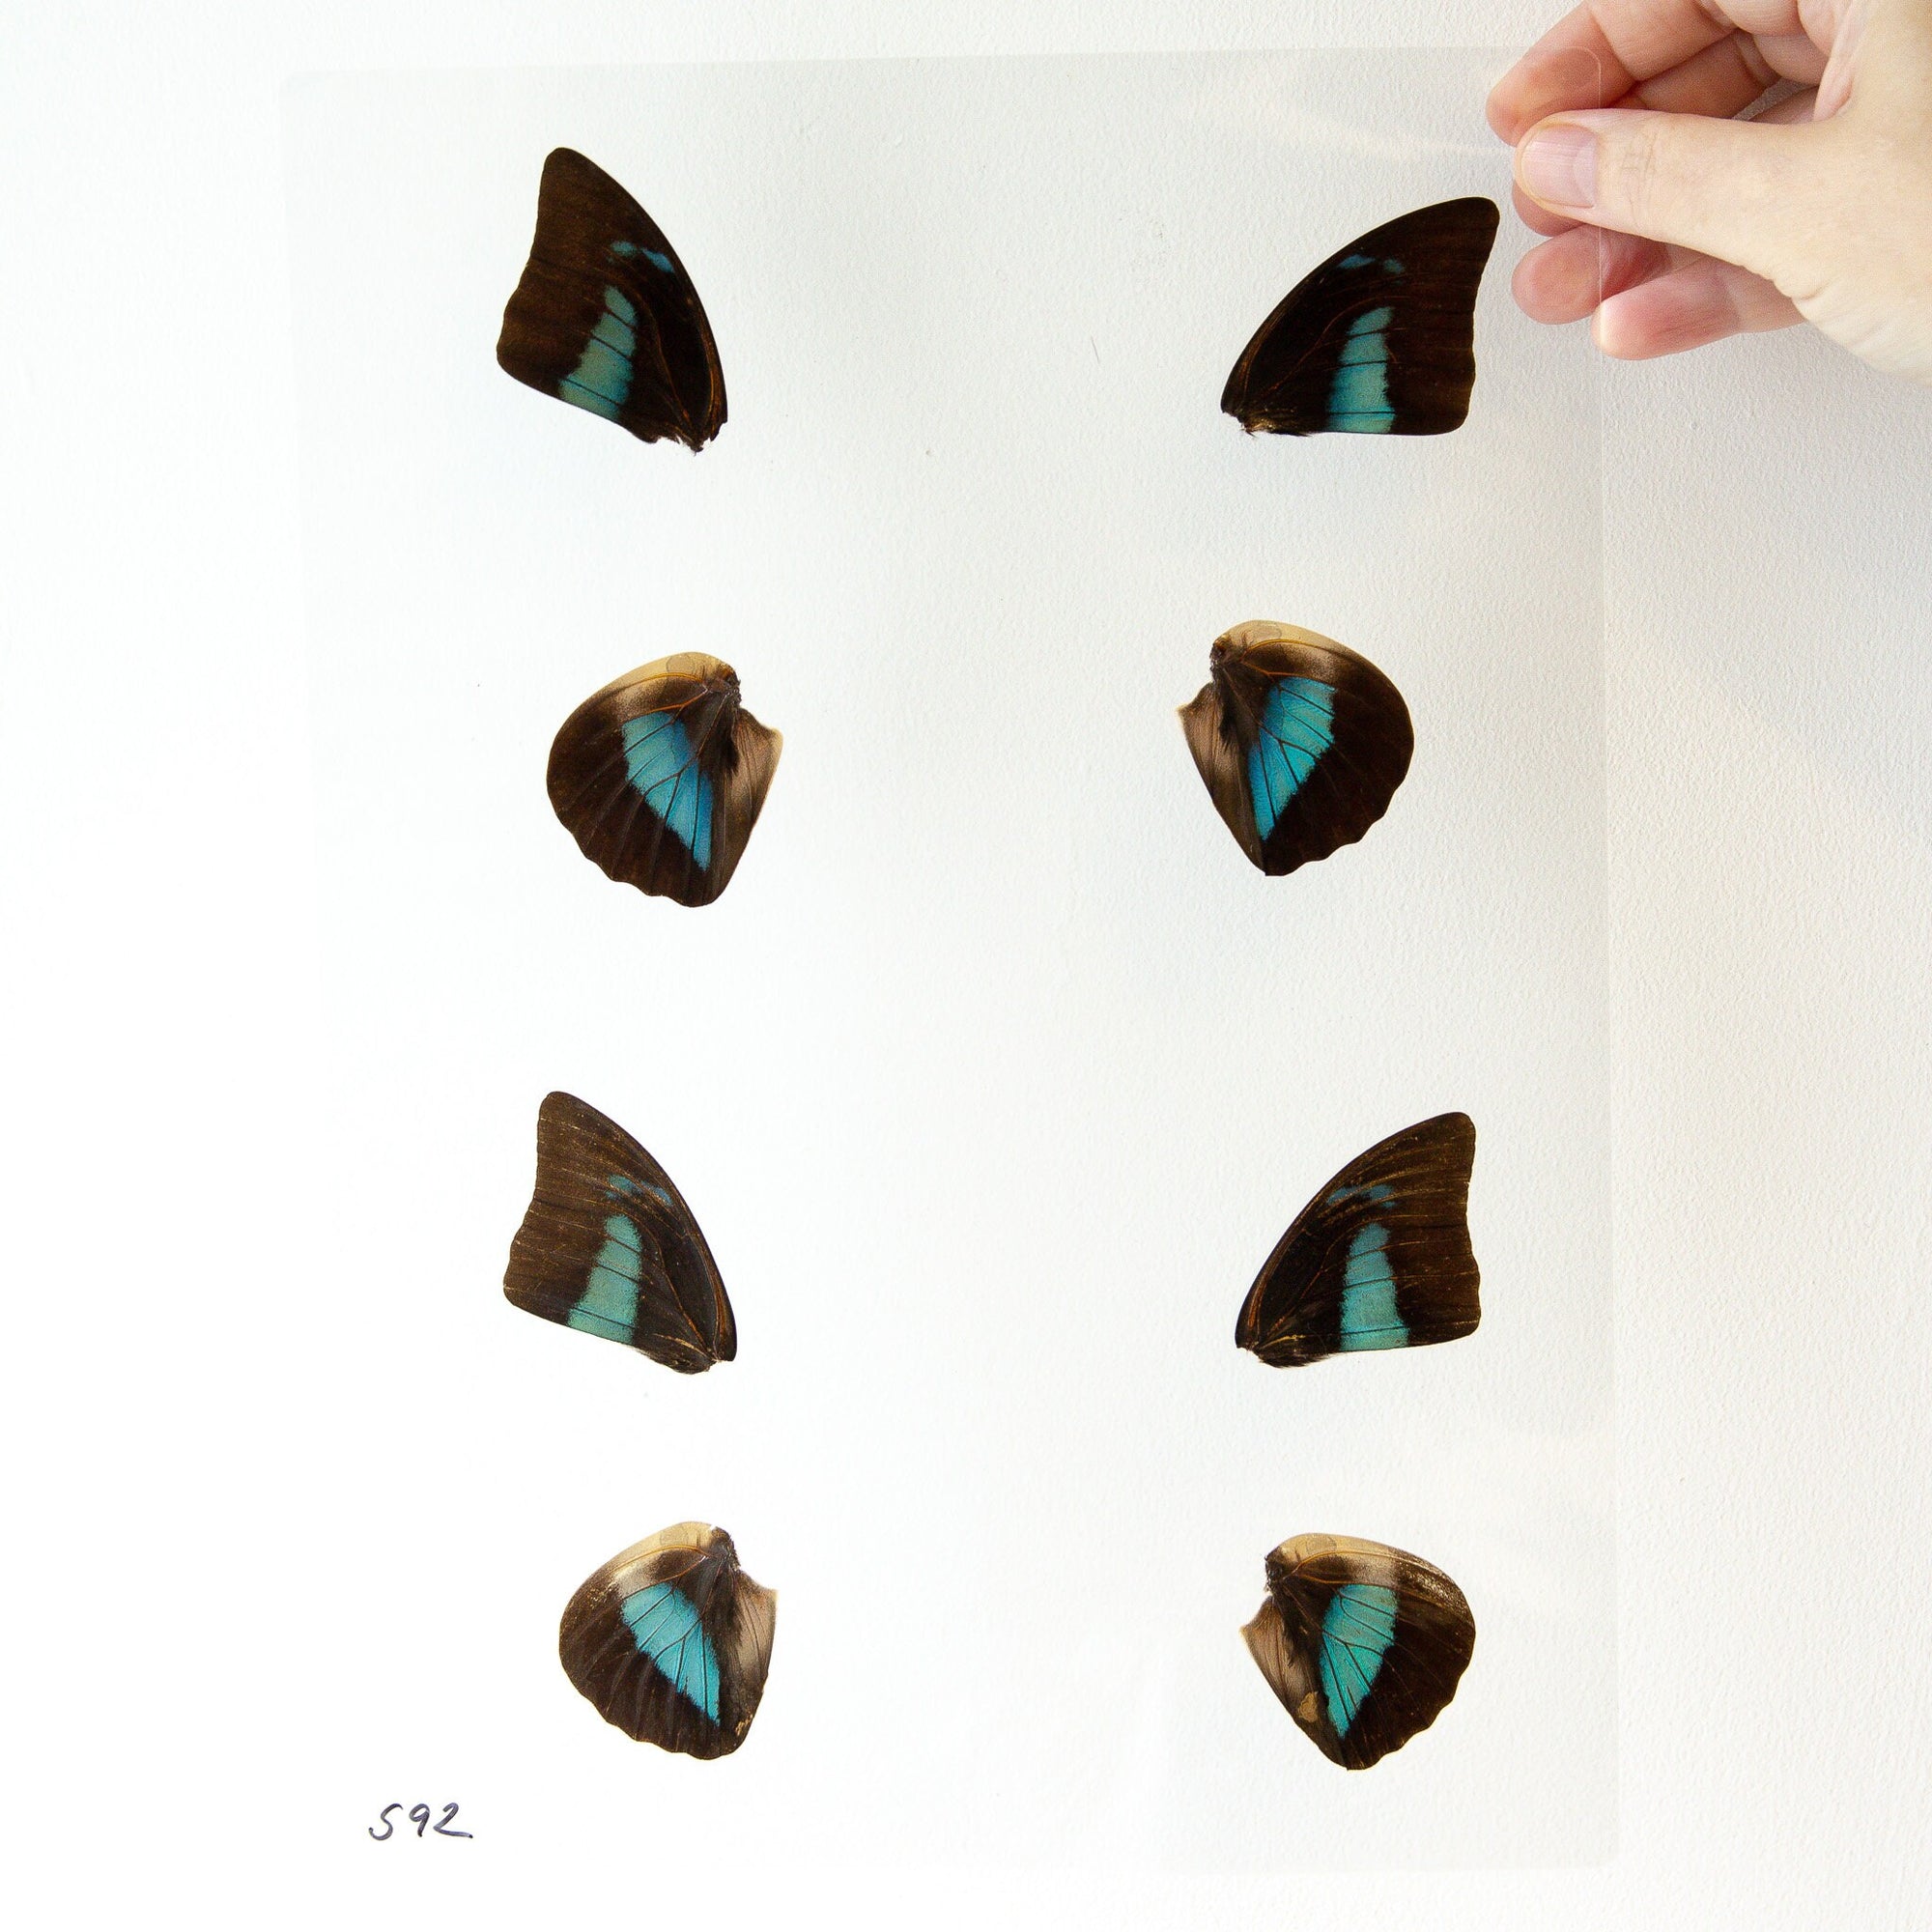 Butterfly Wings GLOSSY LAMINATED SHEET Real Ethically Sourced Specimens Moths Butterflies Wings for Art -- S92